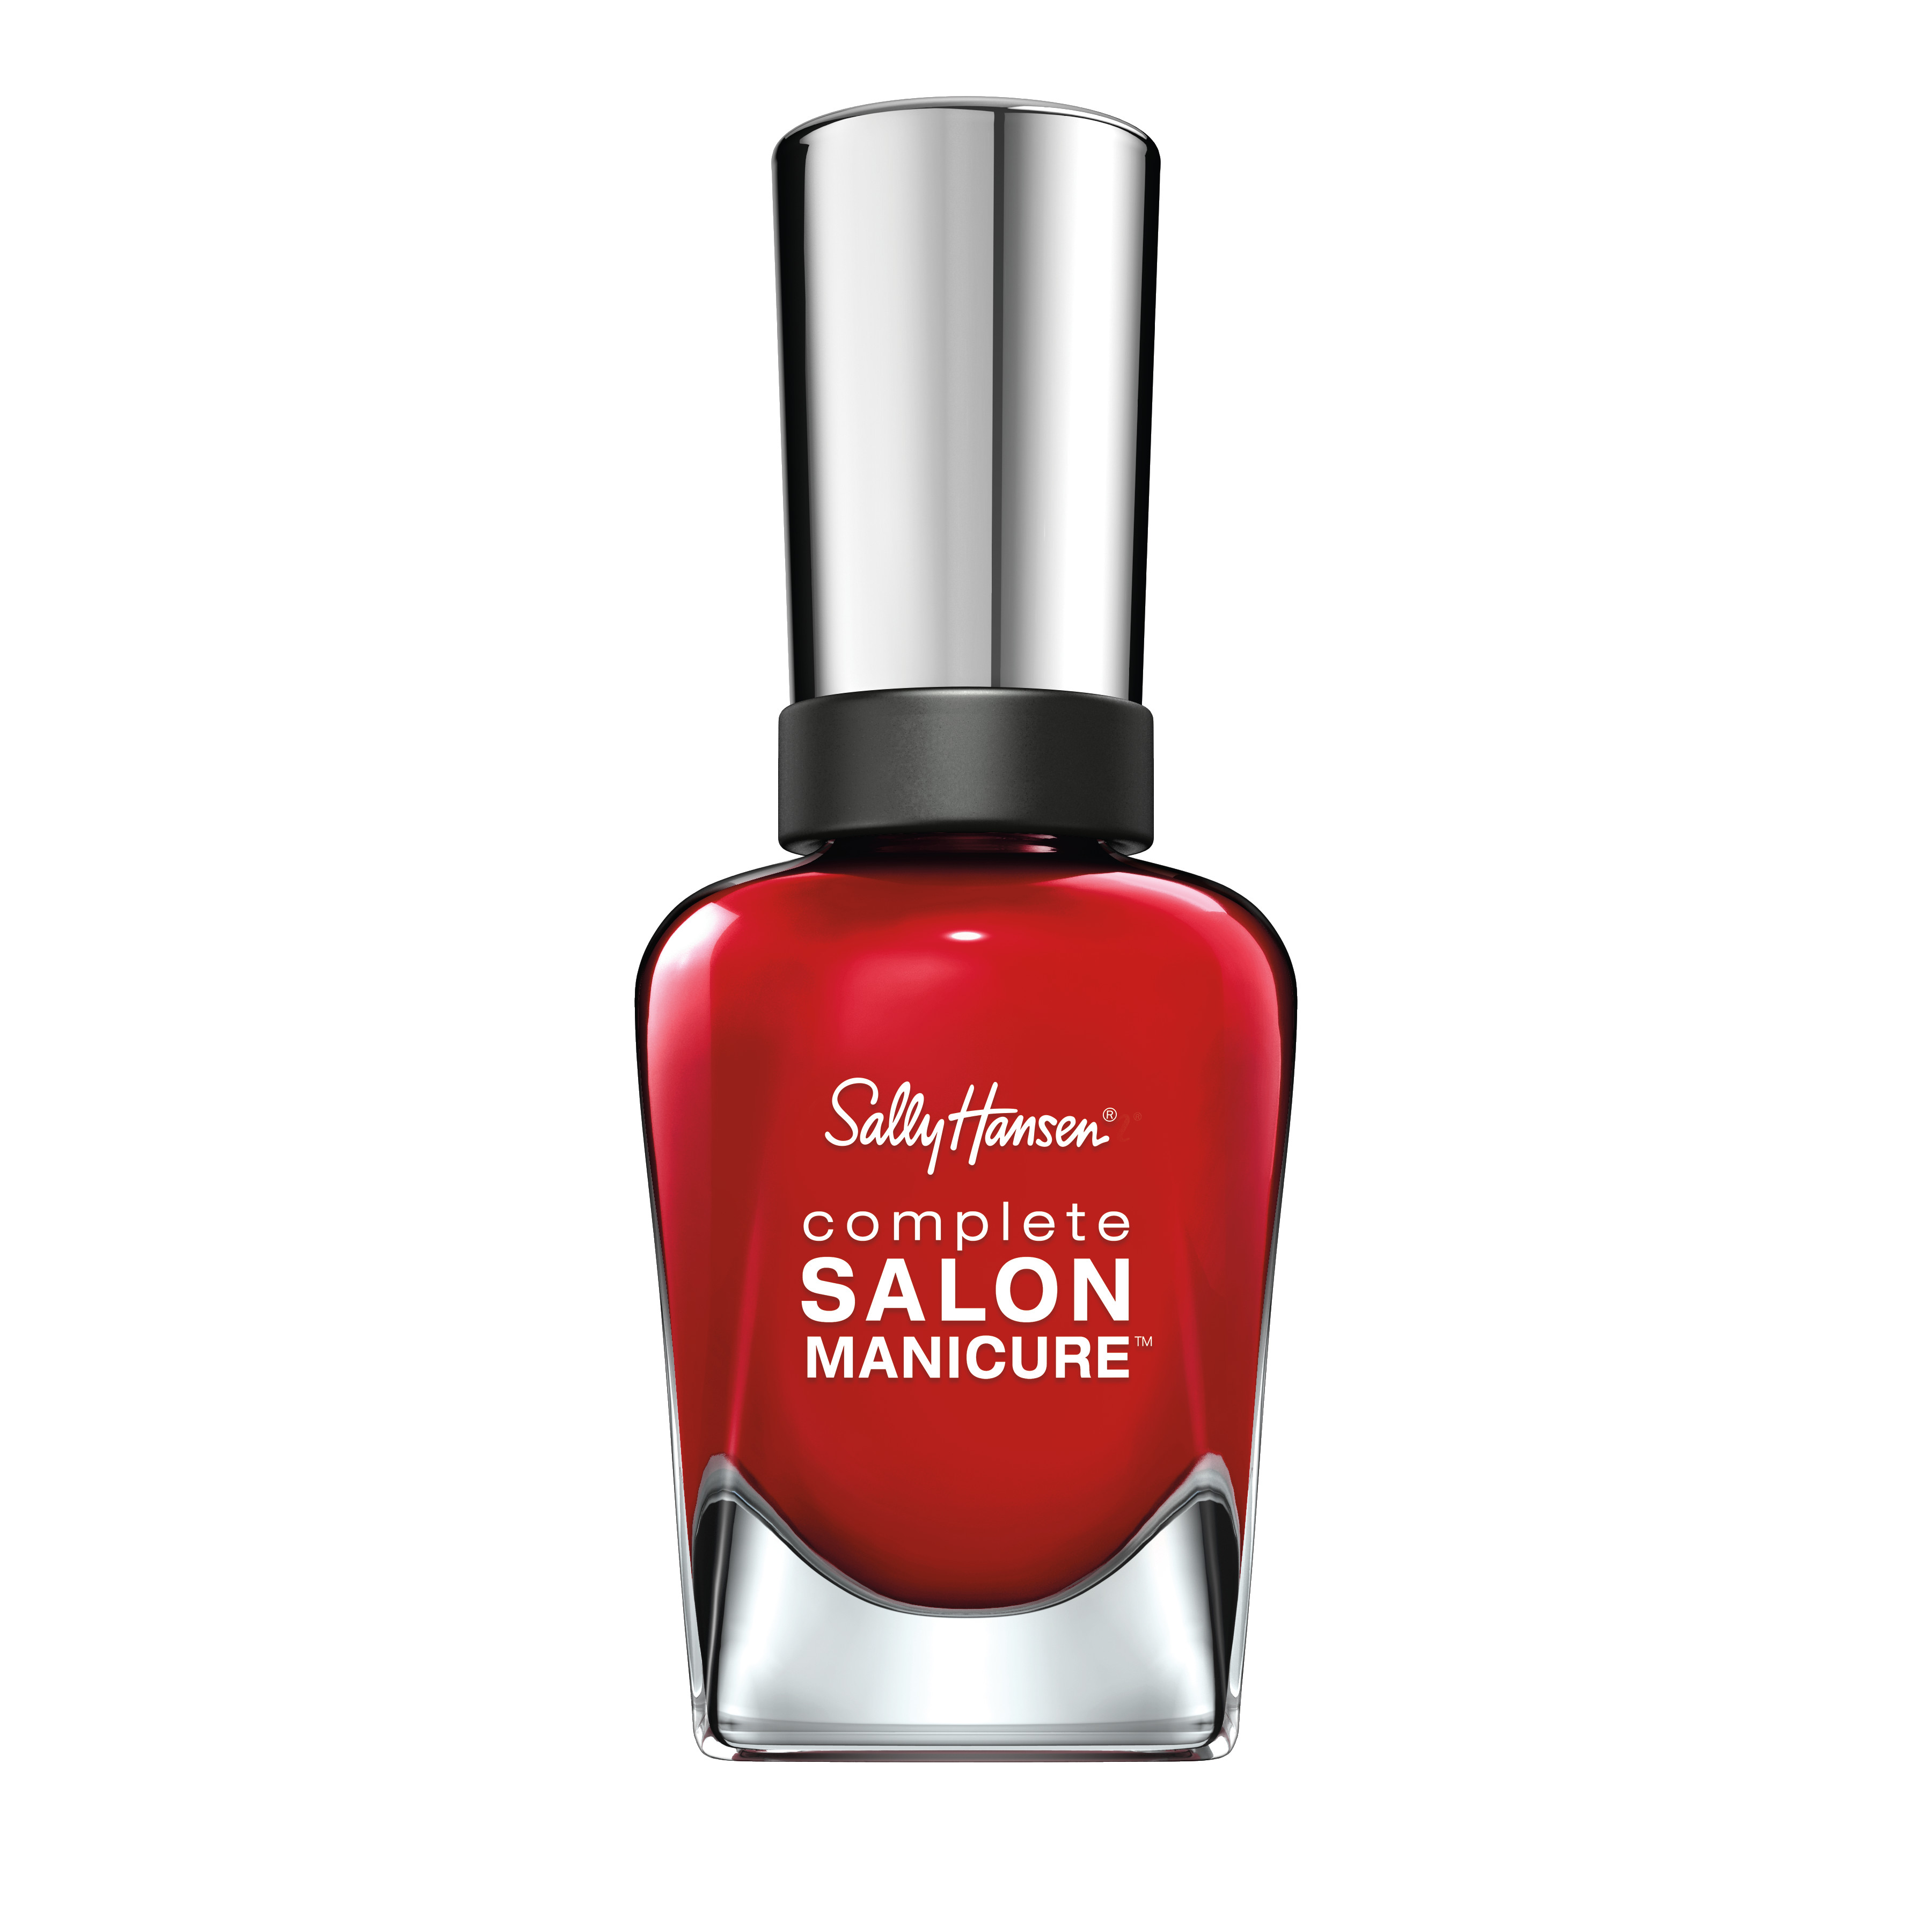 Sally Hansen Complete Salon Manicure Nail Color, Red My Lips - image 1 of 3